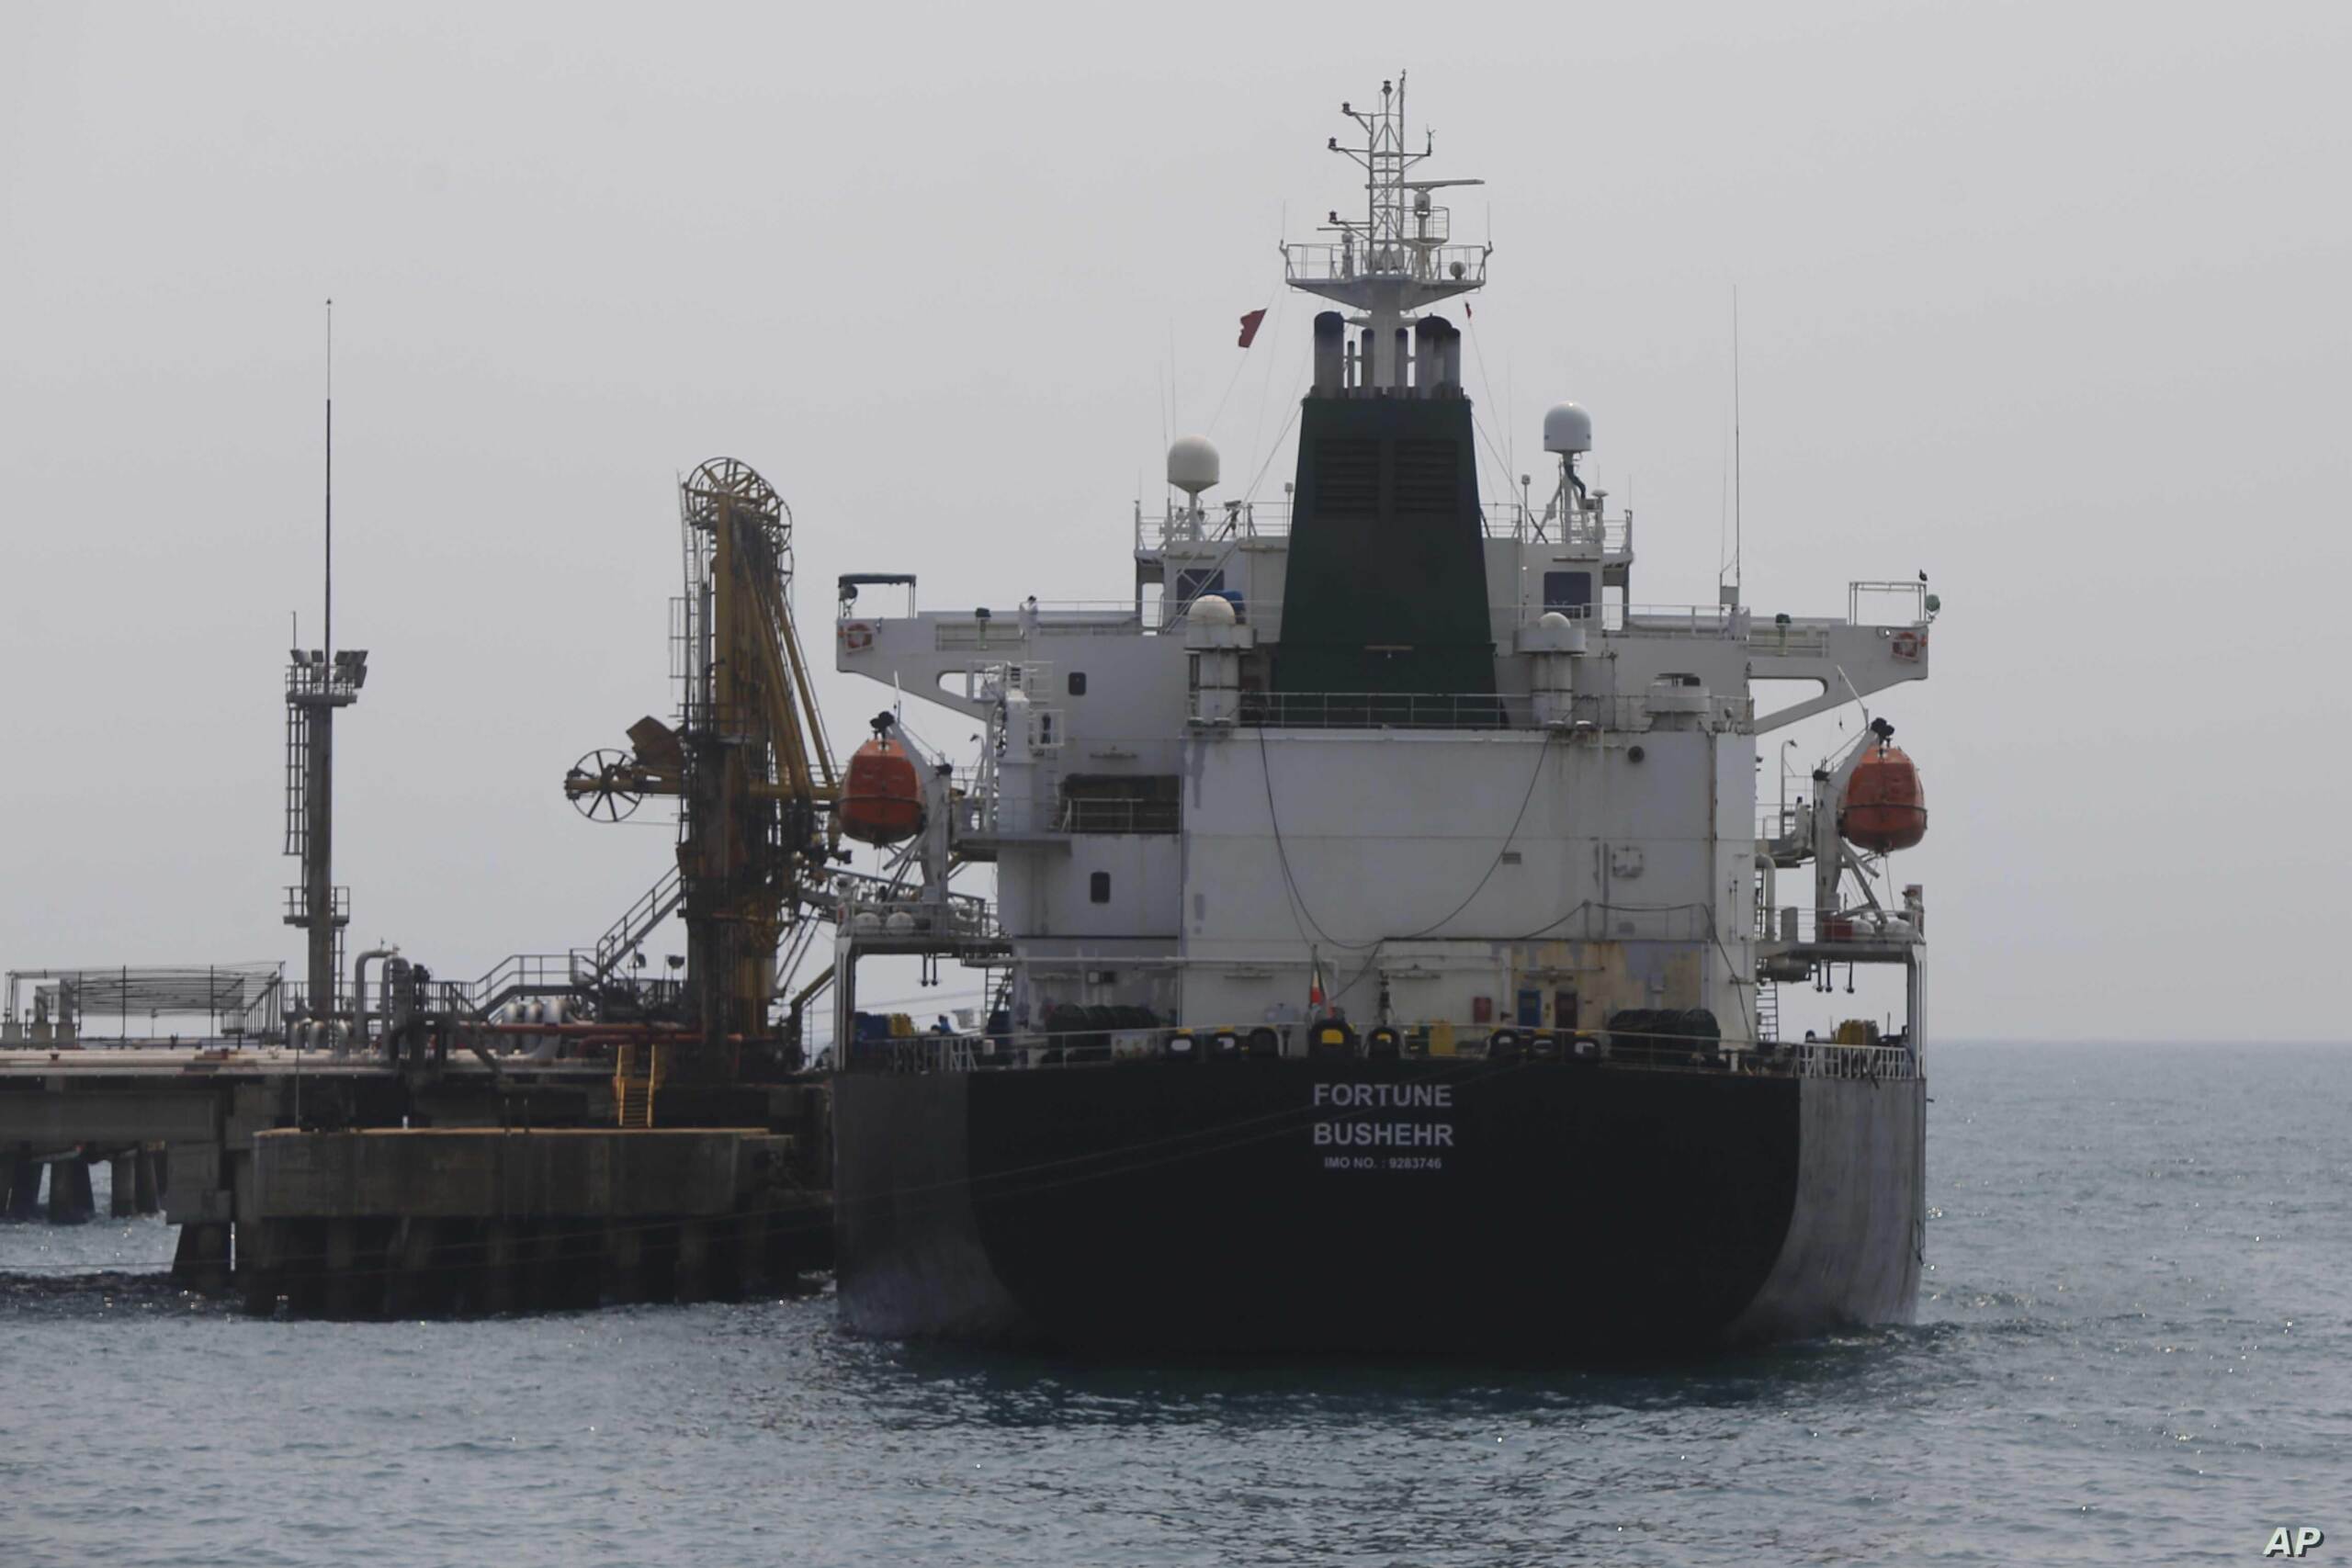 ifmat - Tehran has sent nine oil tankers to its ally Venezuela in recent months